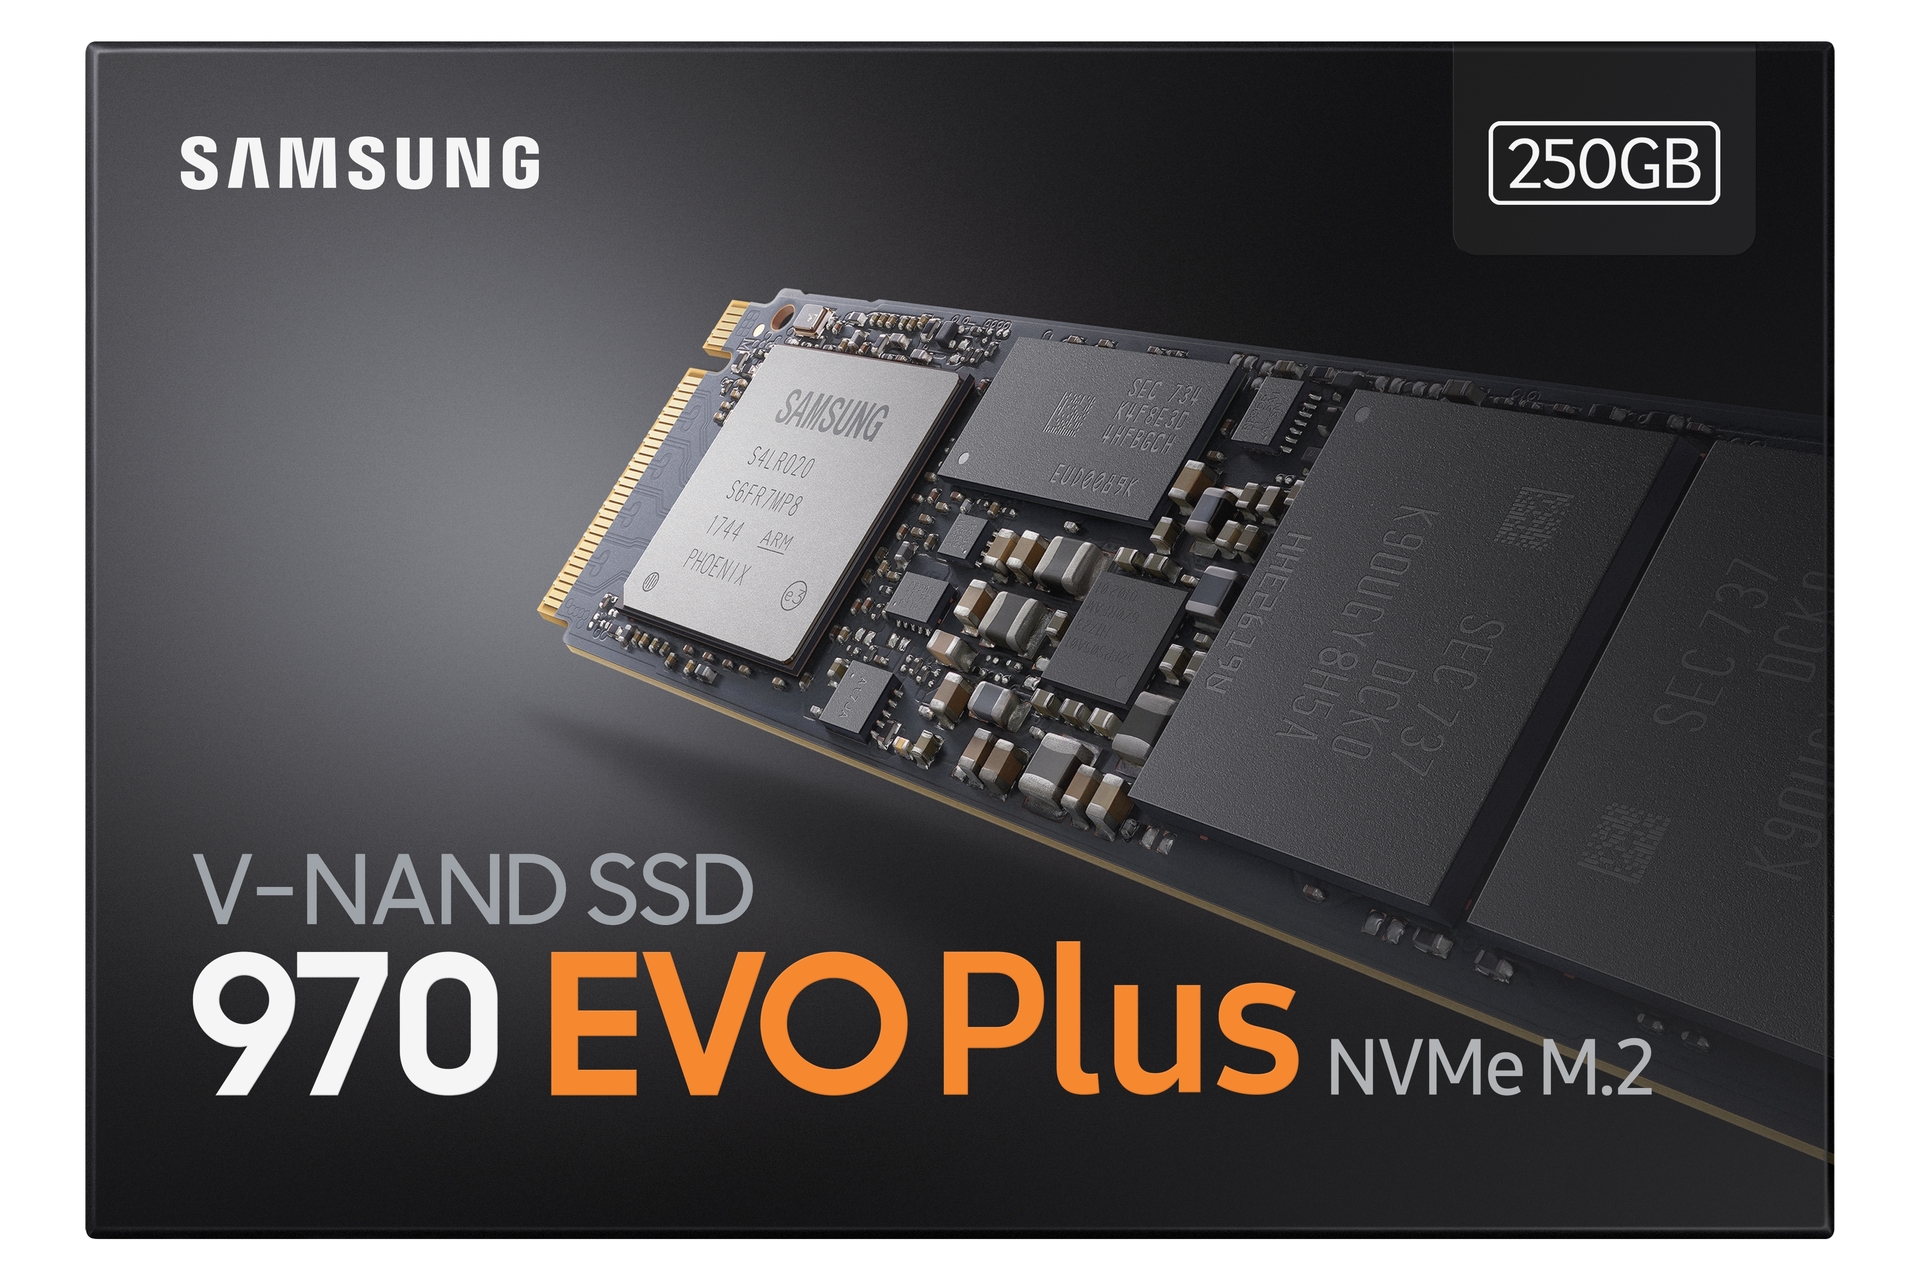 Samsung 970 EVO Plus SSD 250GB - M.2 NVMe Interface Internal Solid State Drive with V-NAND Technology (MZ-V7S250B/AM)